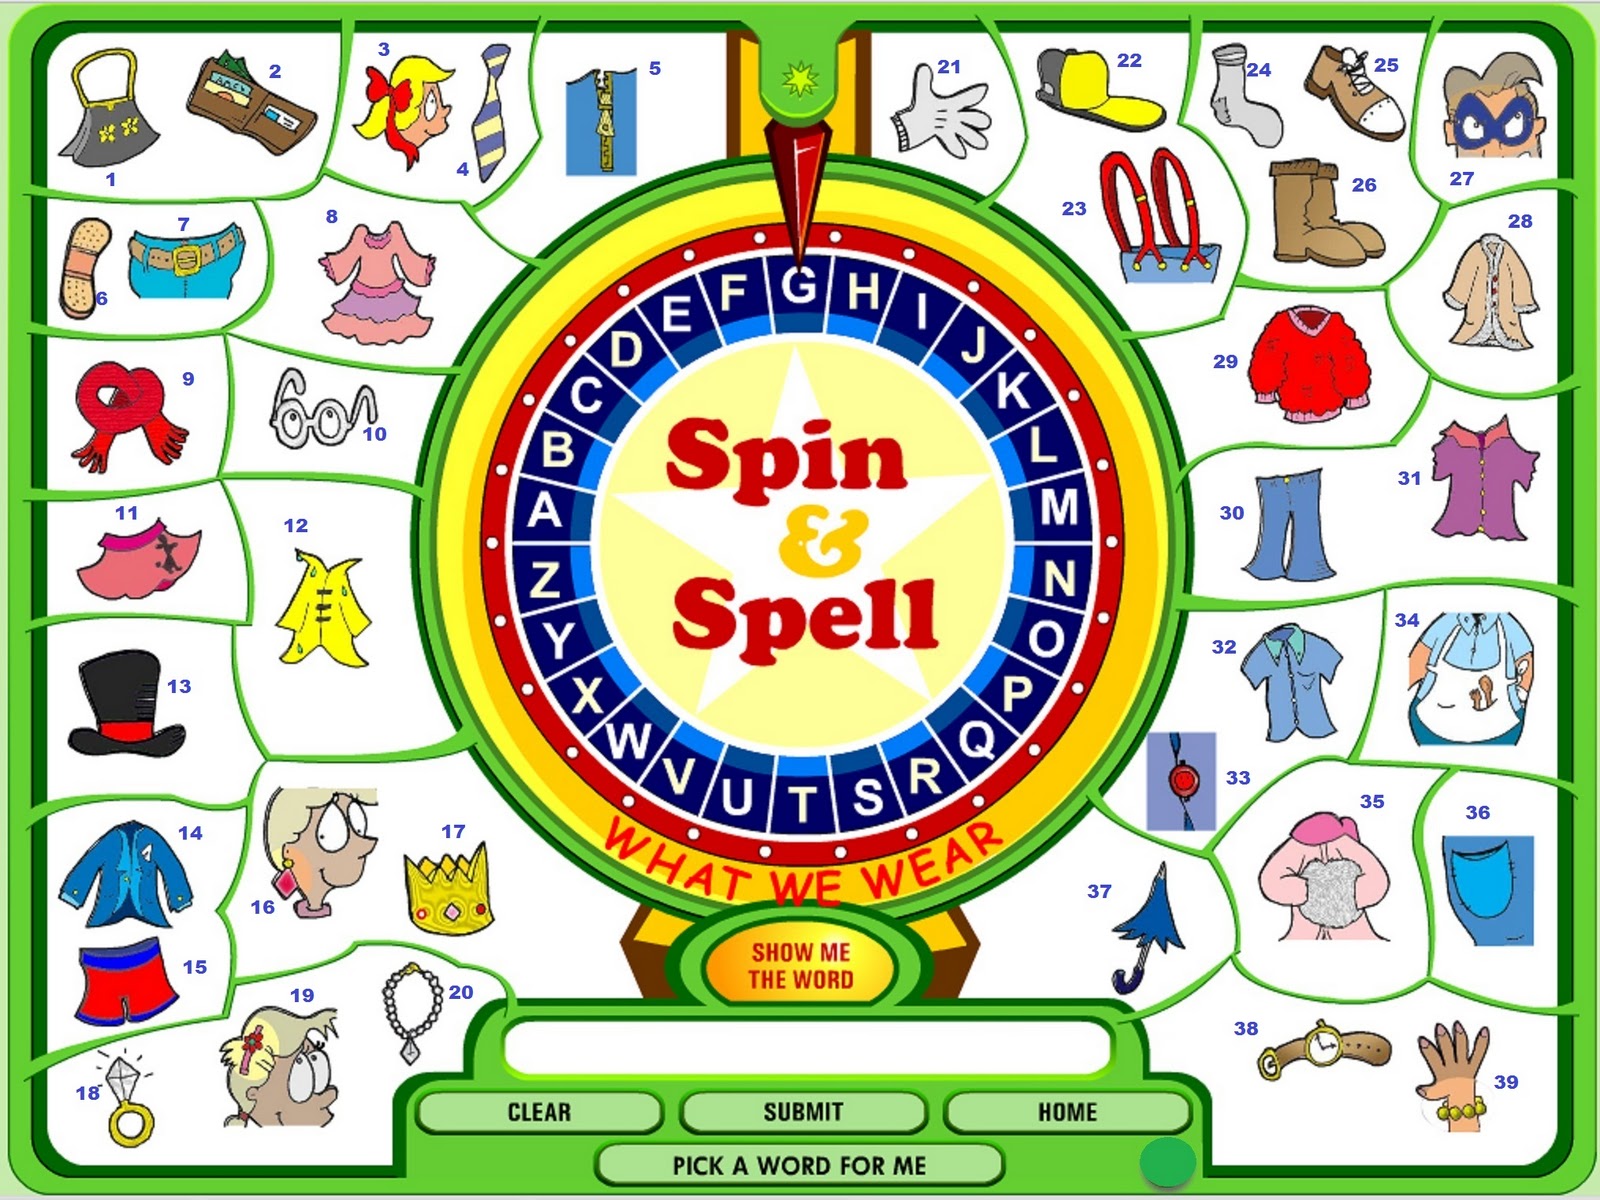 English game reading. Board game Spelling. Spell Words игра. Spelling games for Kids. Spelling English game.